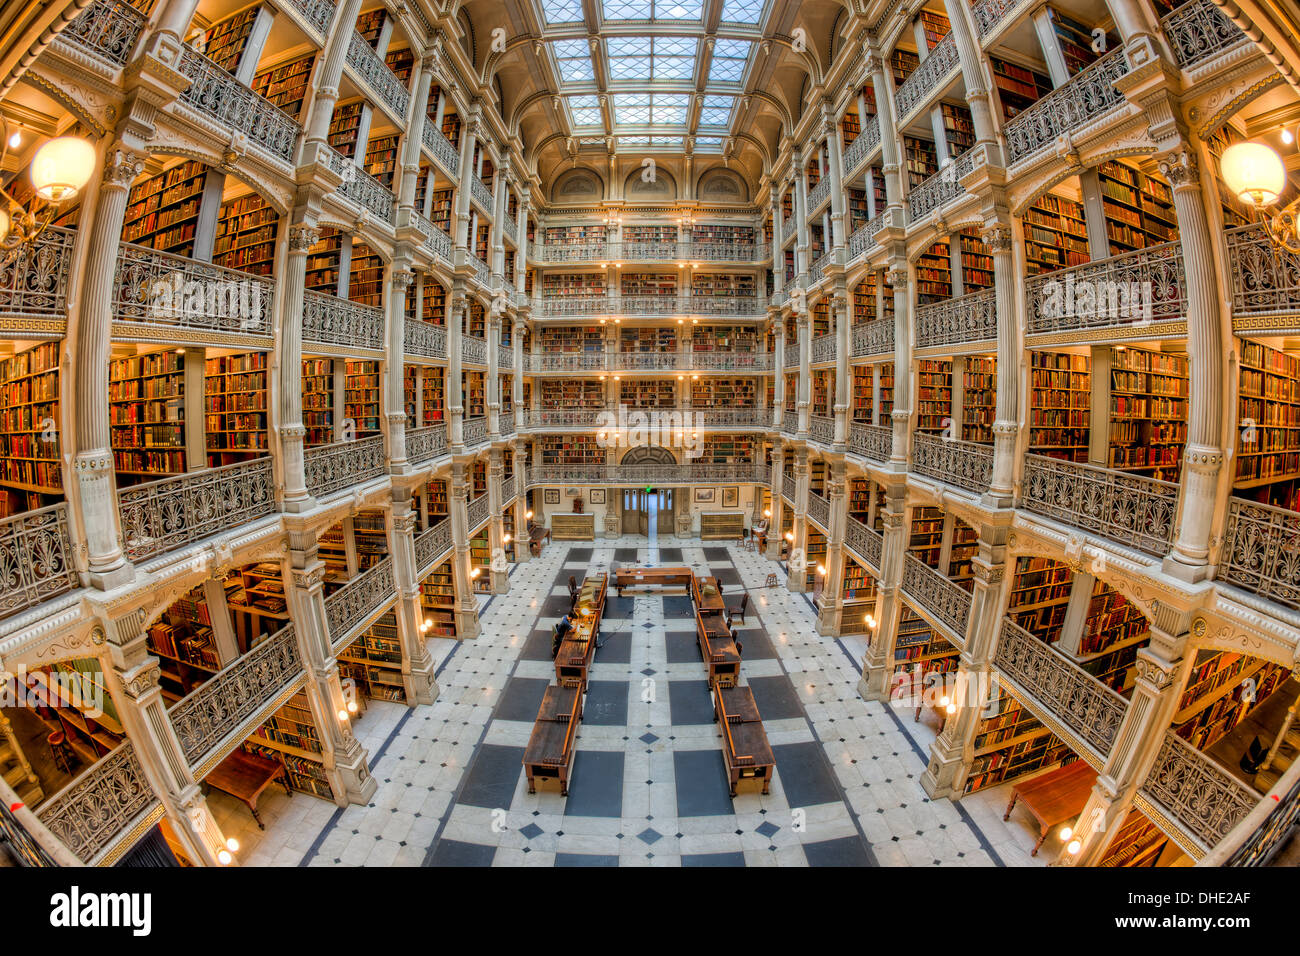 The beautiful interior of the George Peabody Library, a part of Johns Hopkins University, in Baltimore, Maryland. Stock Photo